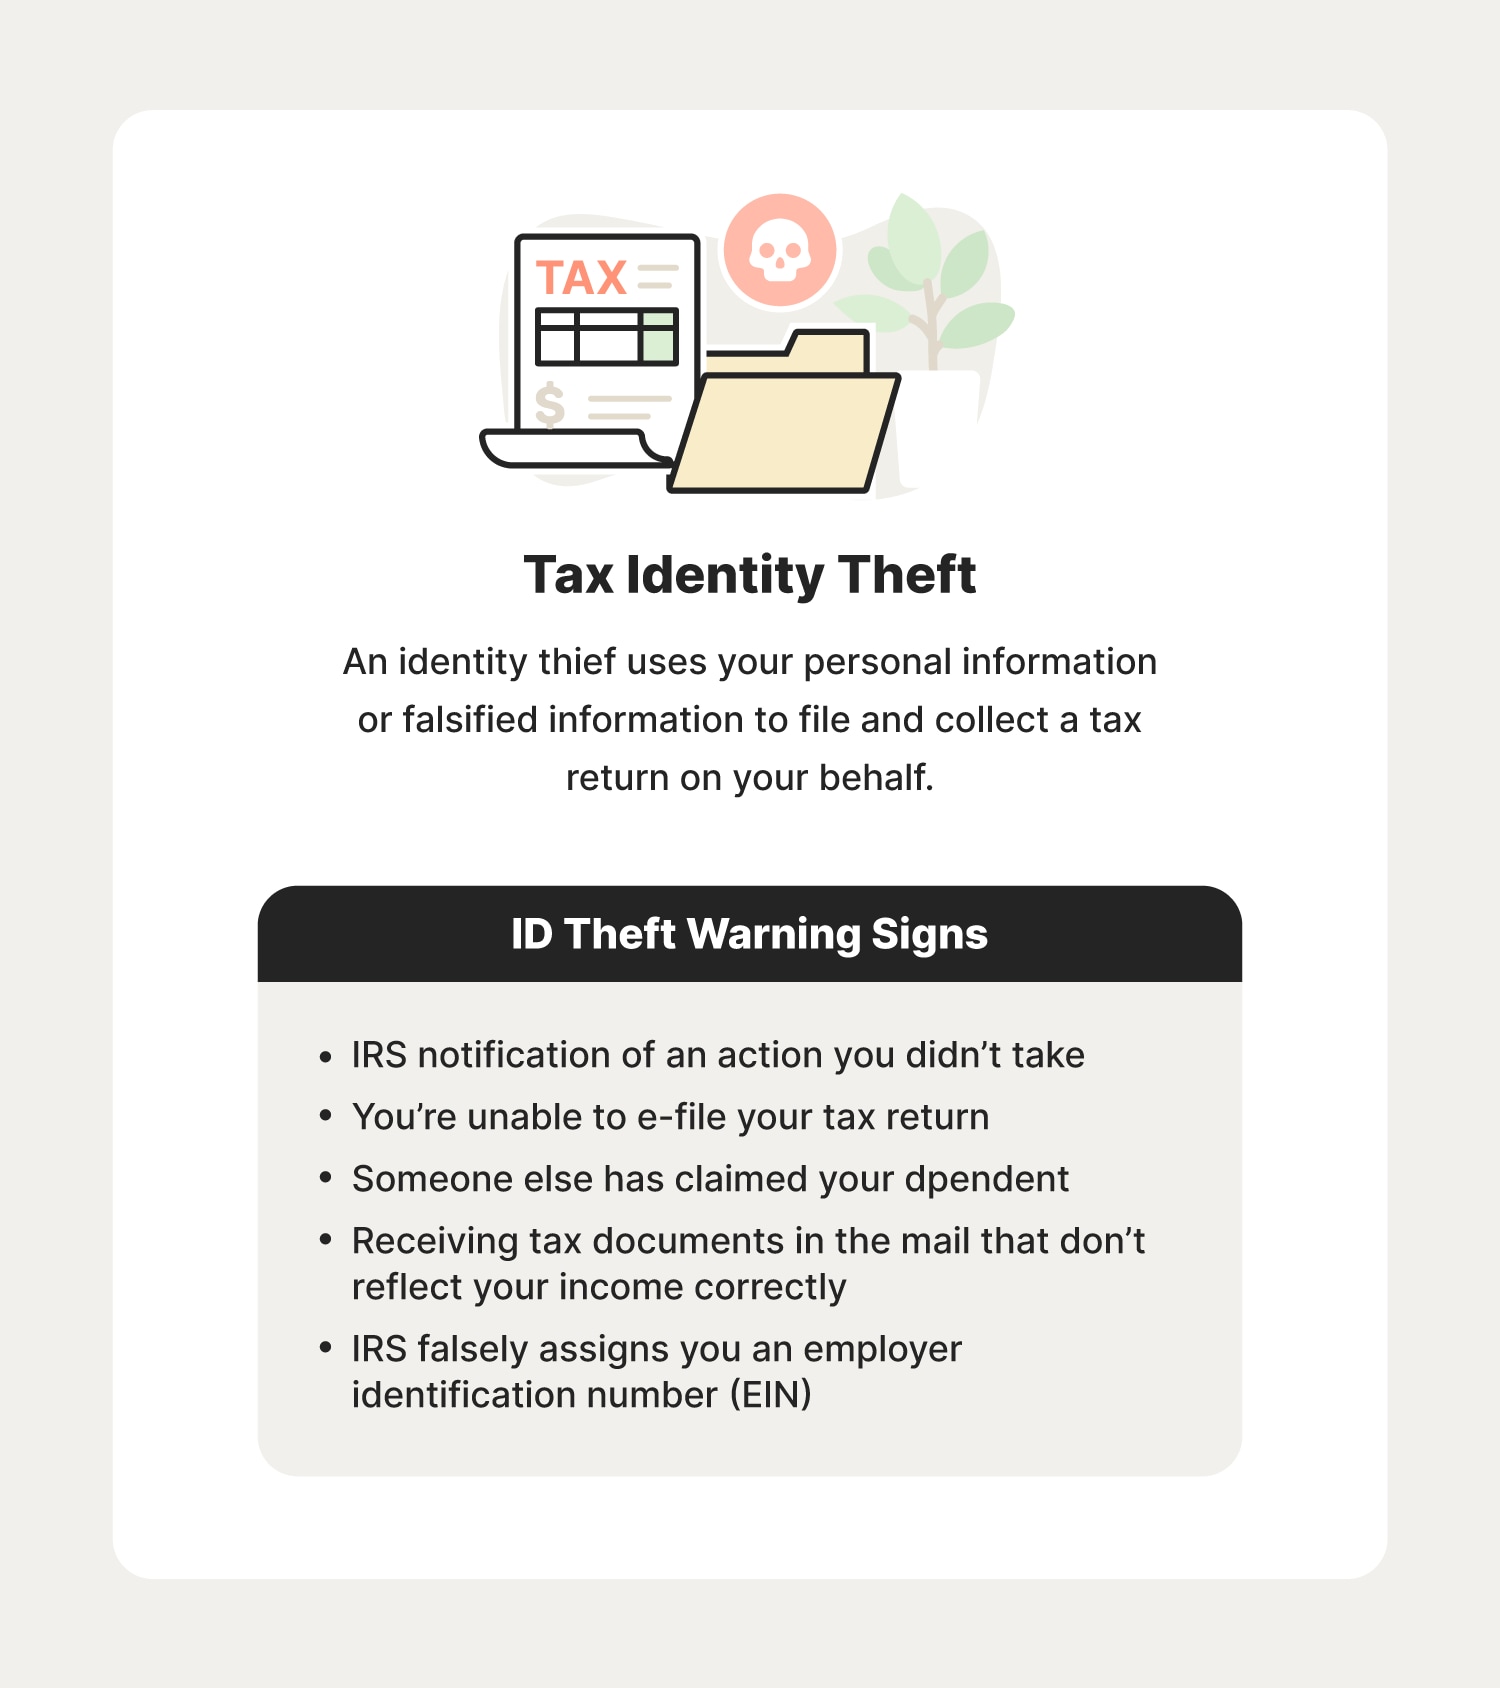 Illustrated chart with information about tax identity theft and some warning signs to look out for.